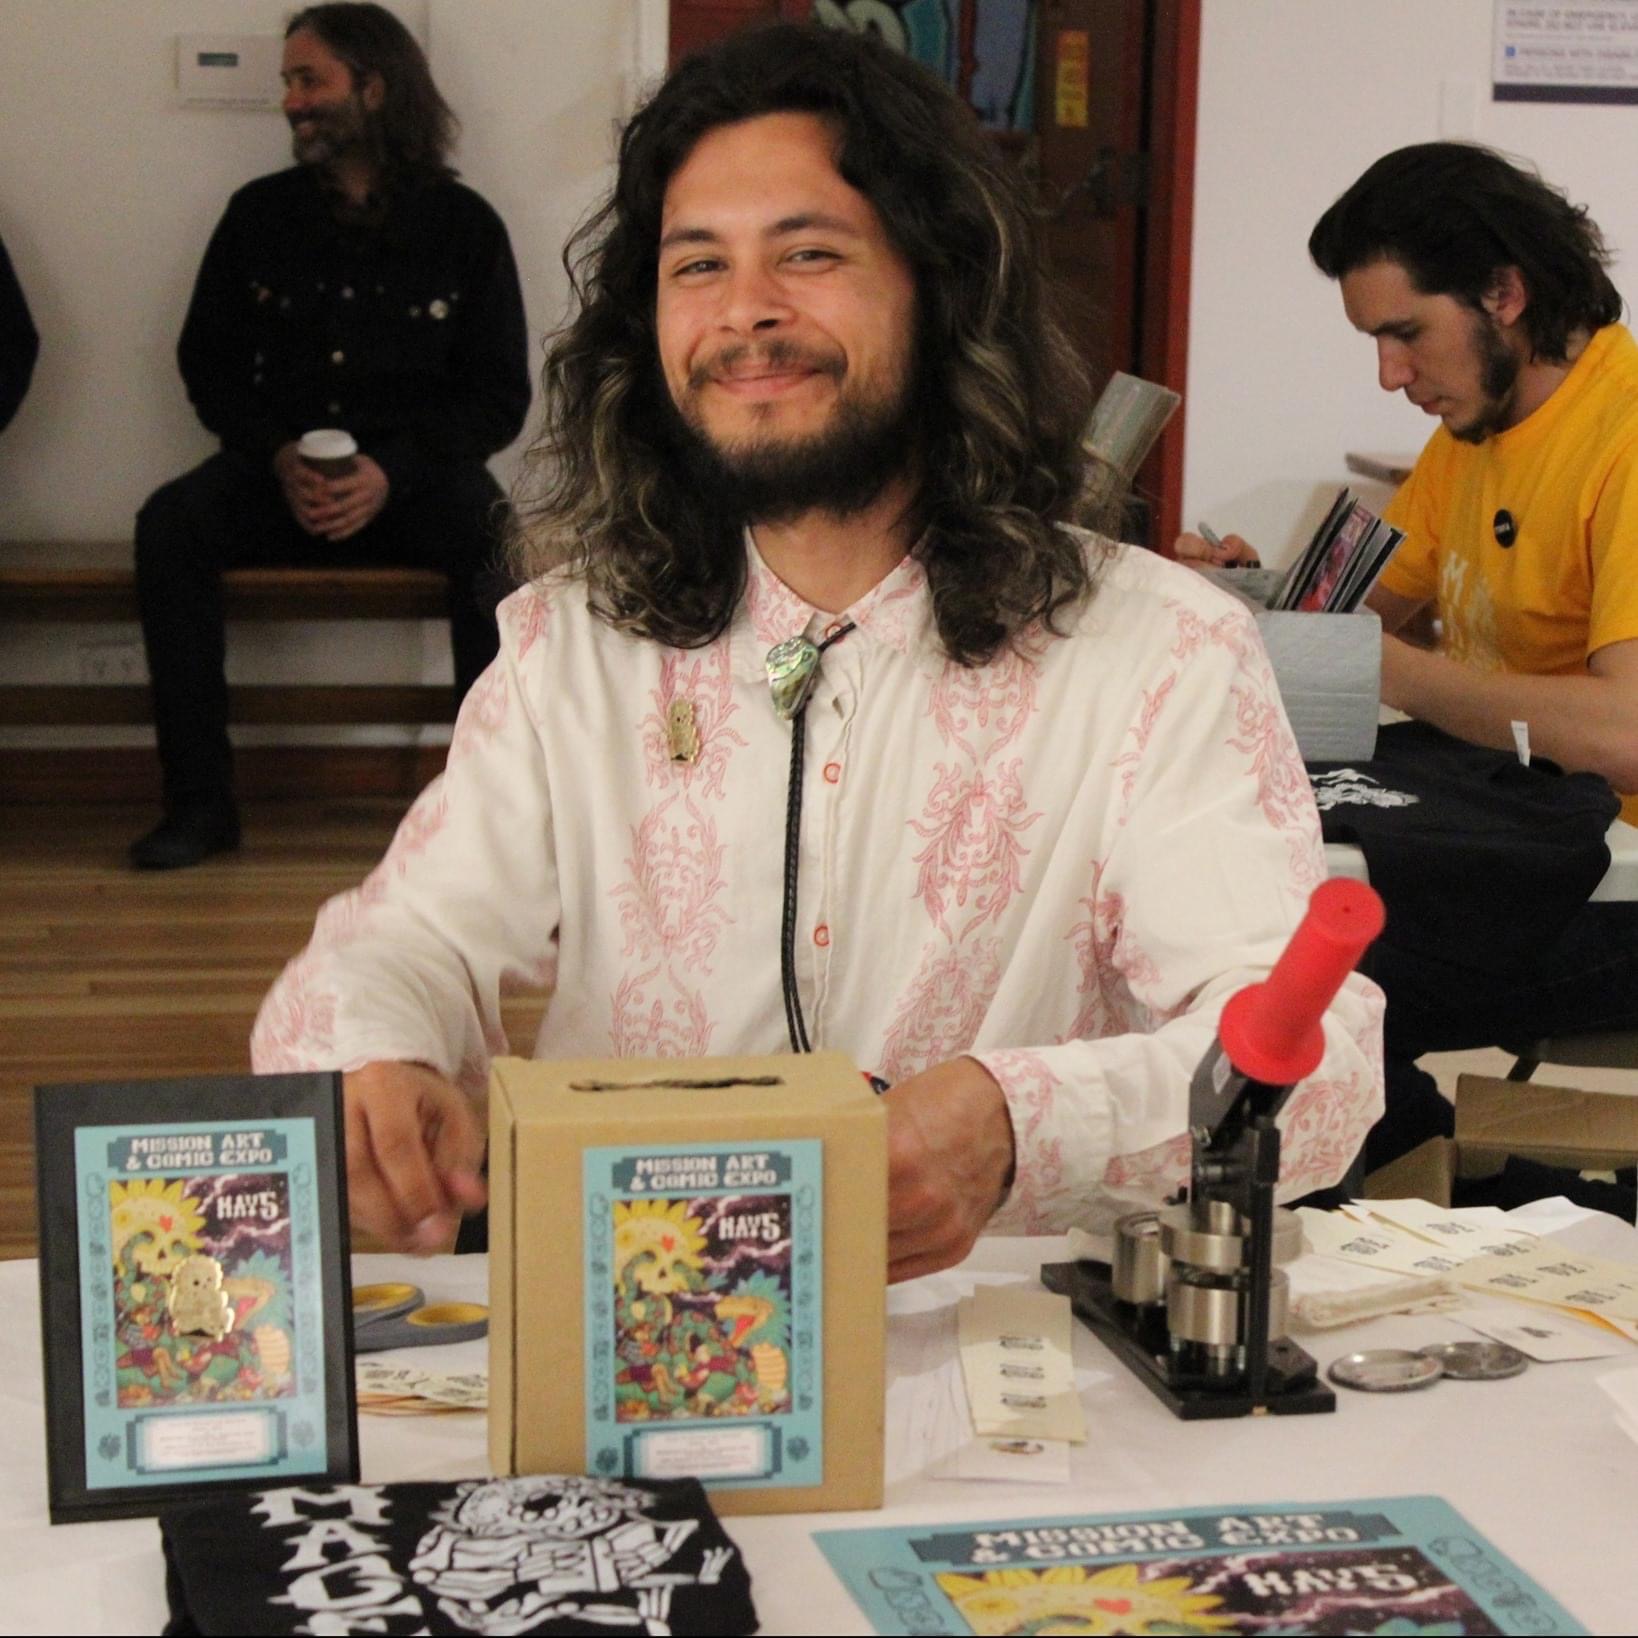 Smiling person with long dark hair, bolo tie in front of table of zines and buttons, two people in background